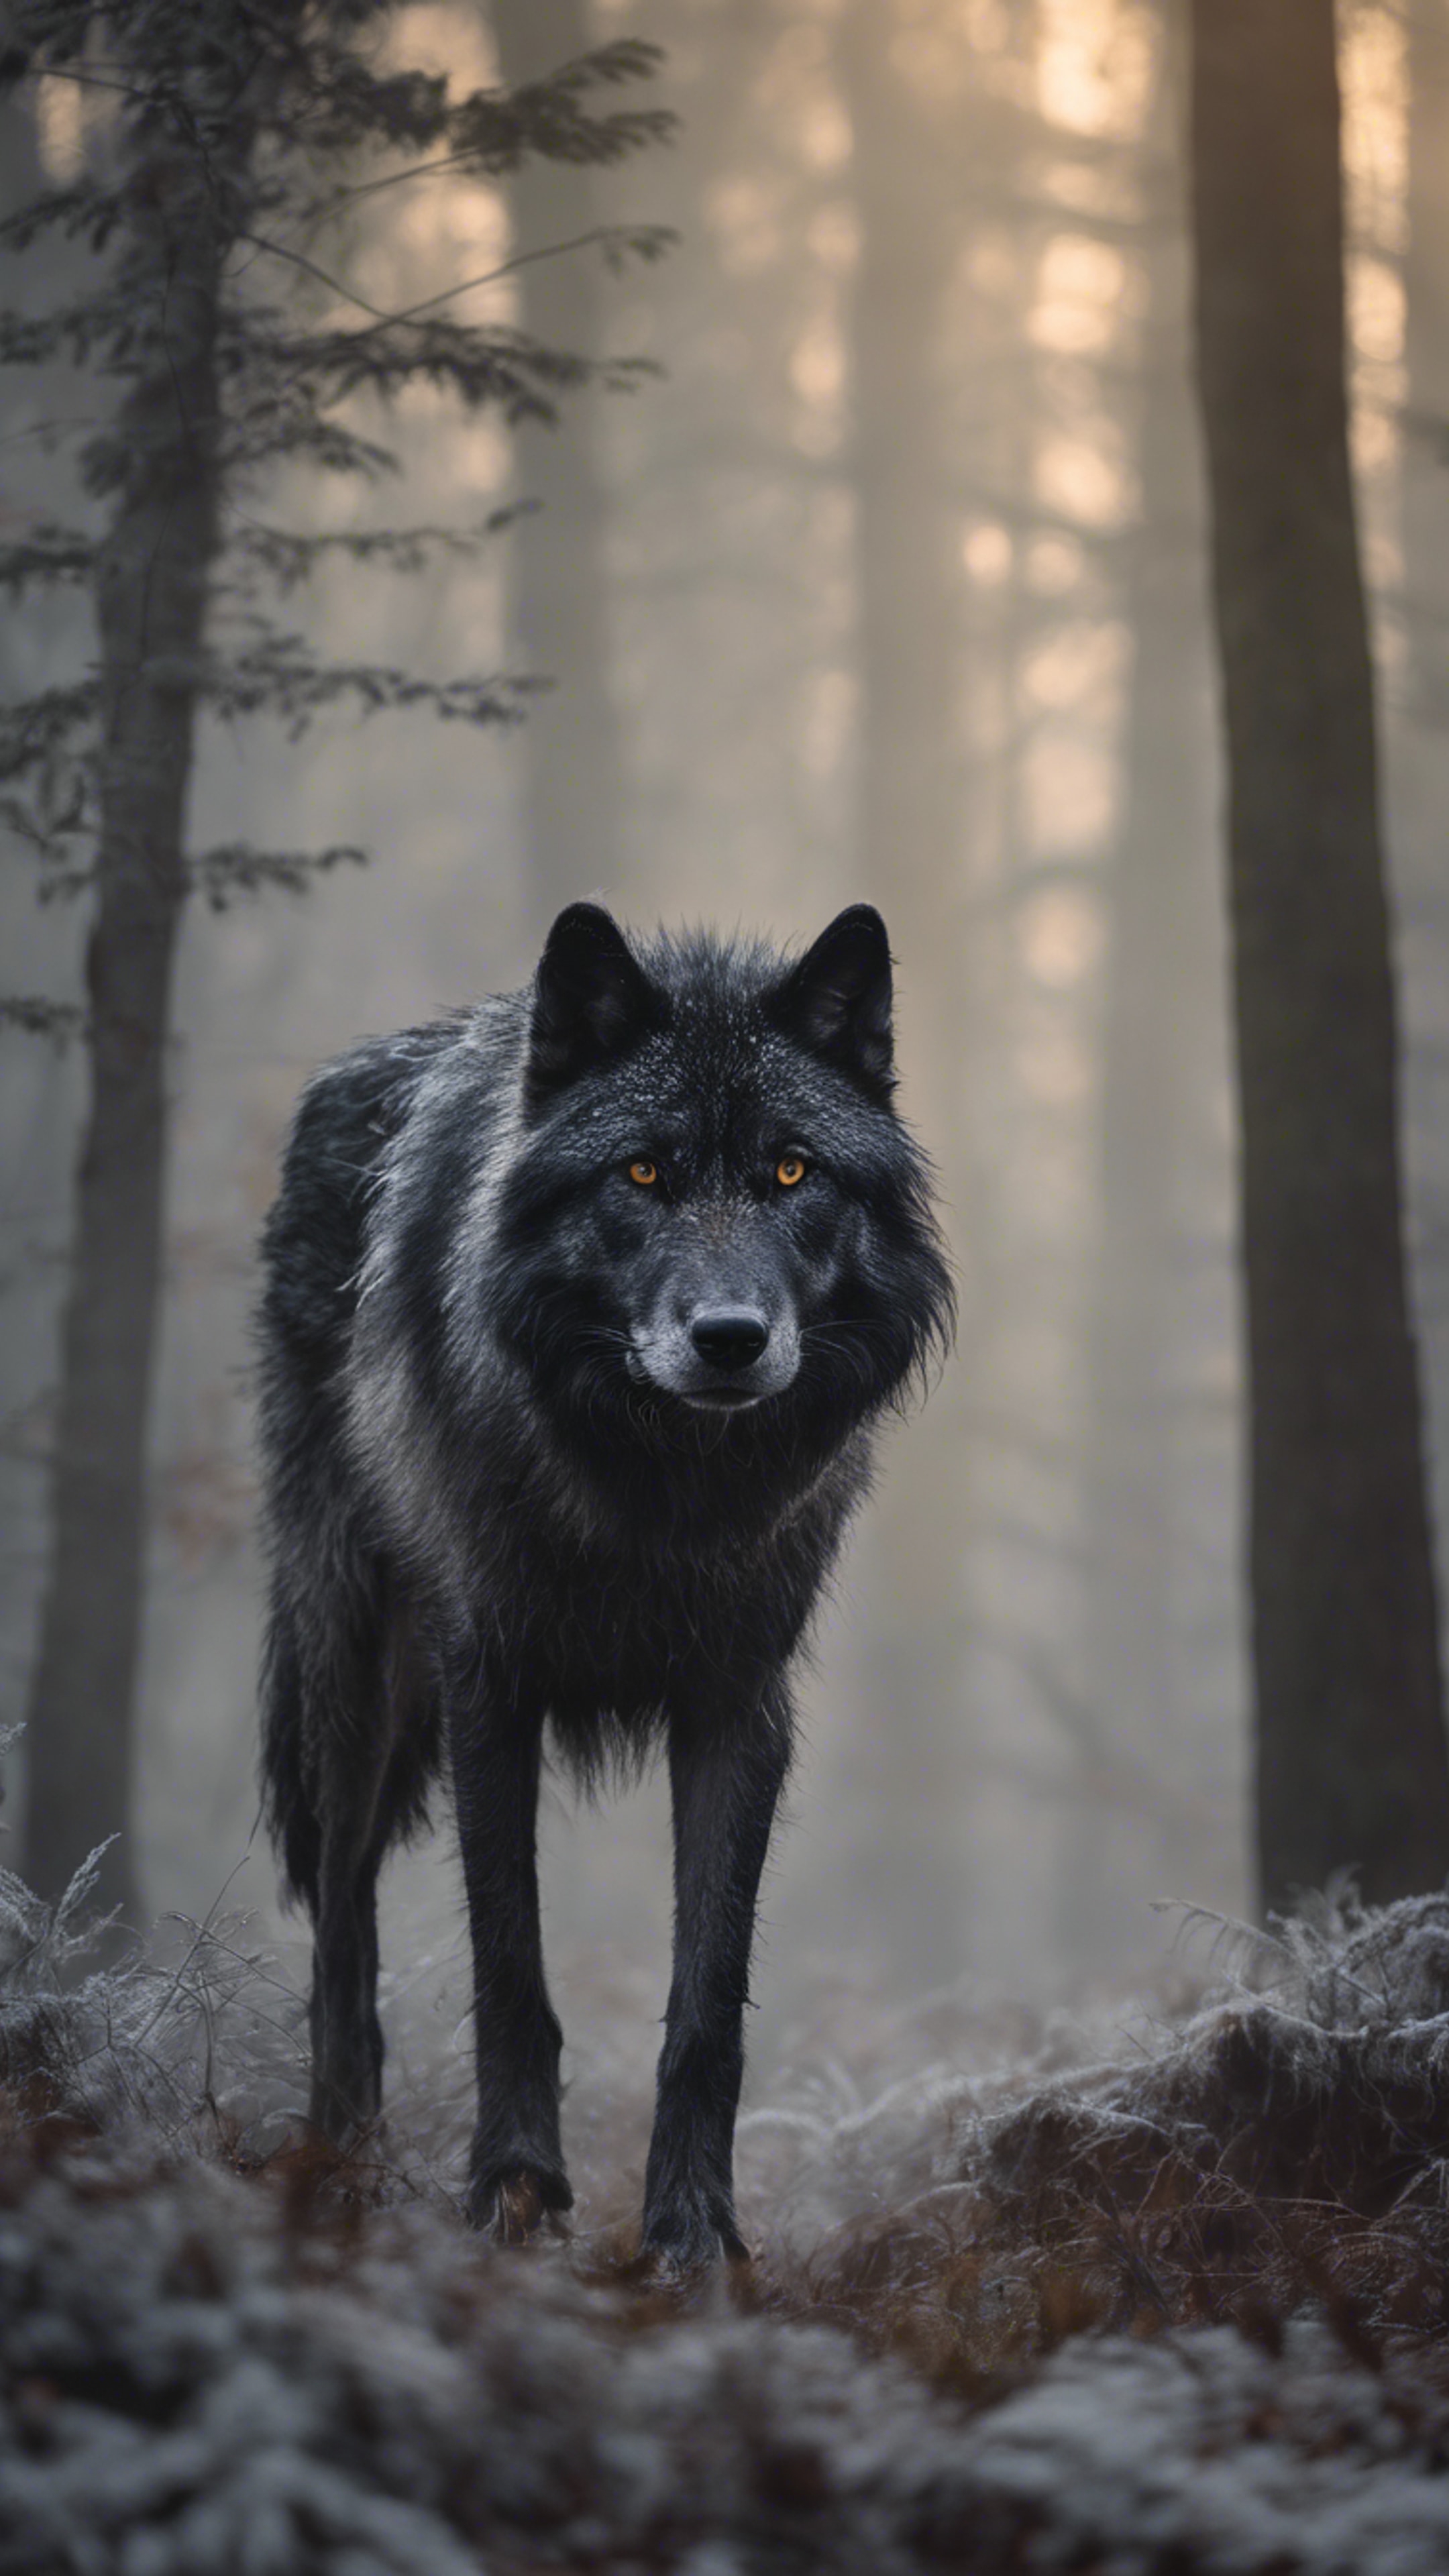 A cool black and gray shaggy wolf prowling through a mist-filled forest at dawn. Kertas dinding[e0adfa1209b347ac9a7e]